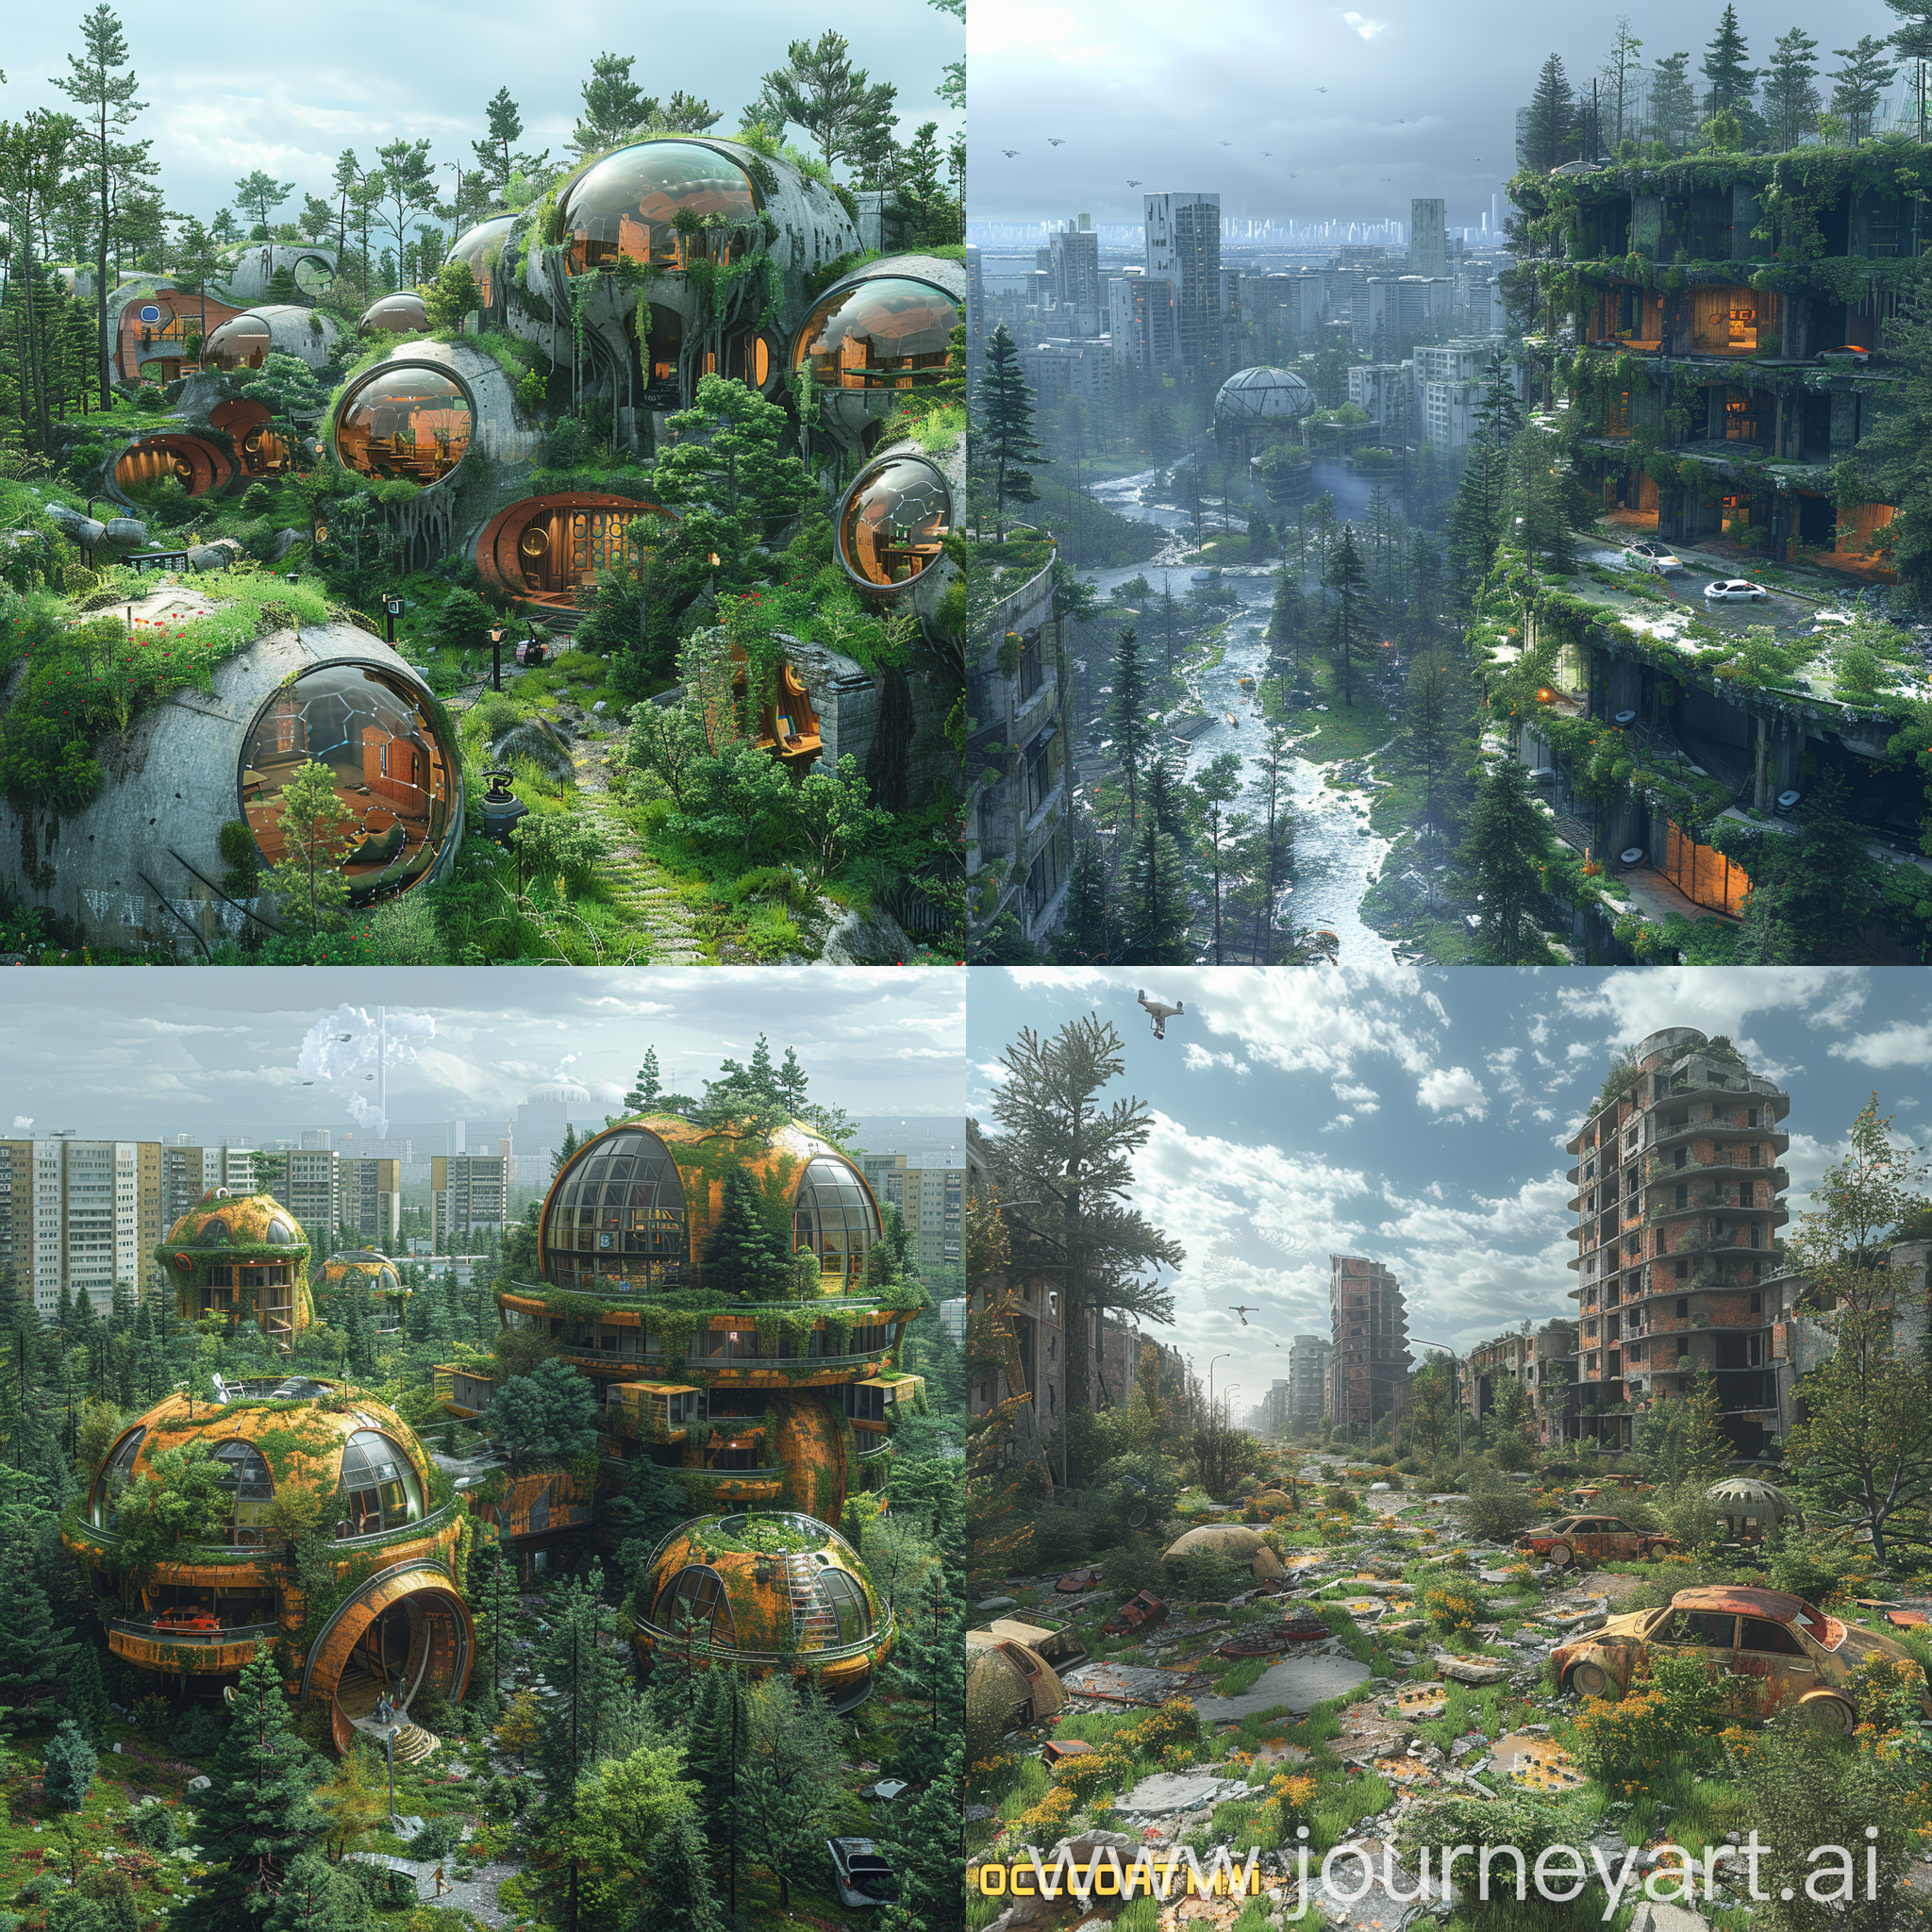 Ultramodern, futuristic Pripyat, The Sarcophagus, Nature Reclaimed, Tech Enhanced, Robotic Cleanup, Self-Driving Cars, Drone Deliveries, Vertical City, Geothermal Power, 3D-Printed Housing, Advanced Healthcare, Educational Hub, Virtual Reality Tourism, AR Games and Learning, Smart Homes, Vertical Farms, Renewable Energy, Advanced Transportation, Waste-to-Energy Plants, Desalination Plant, Climate-Controlled Domes, AI Assistants, octane render --stylize 1000